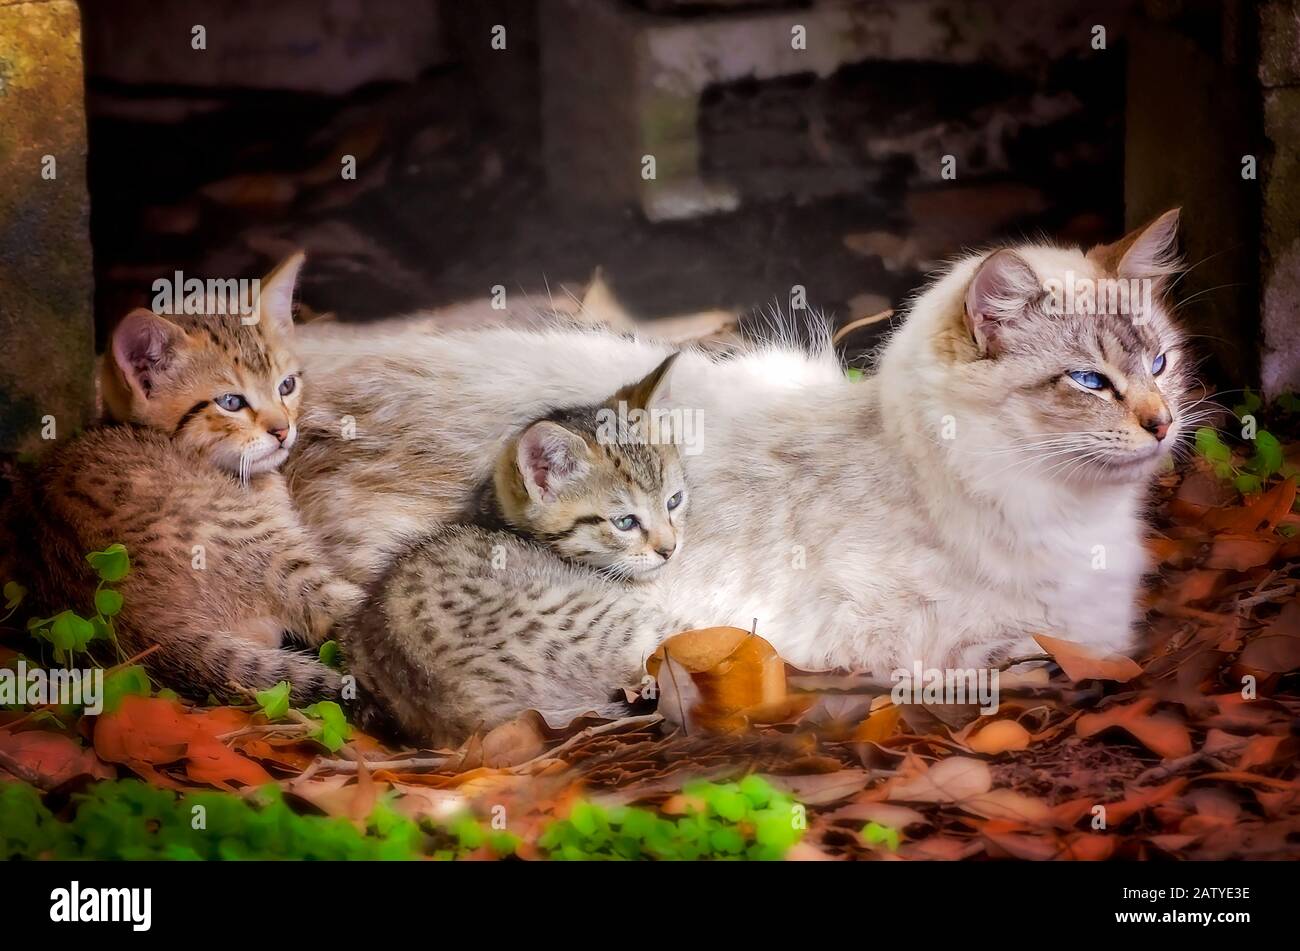 A mother cat lays beside her two six-week-old tabby kittens, Jan. 30, 2020, in Coden, Alabama. Stock Photo